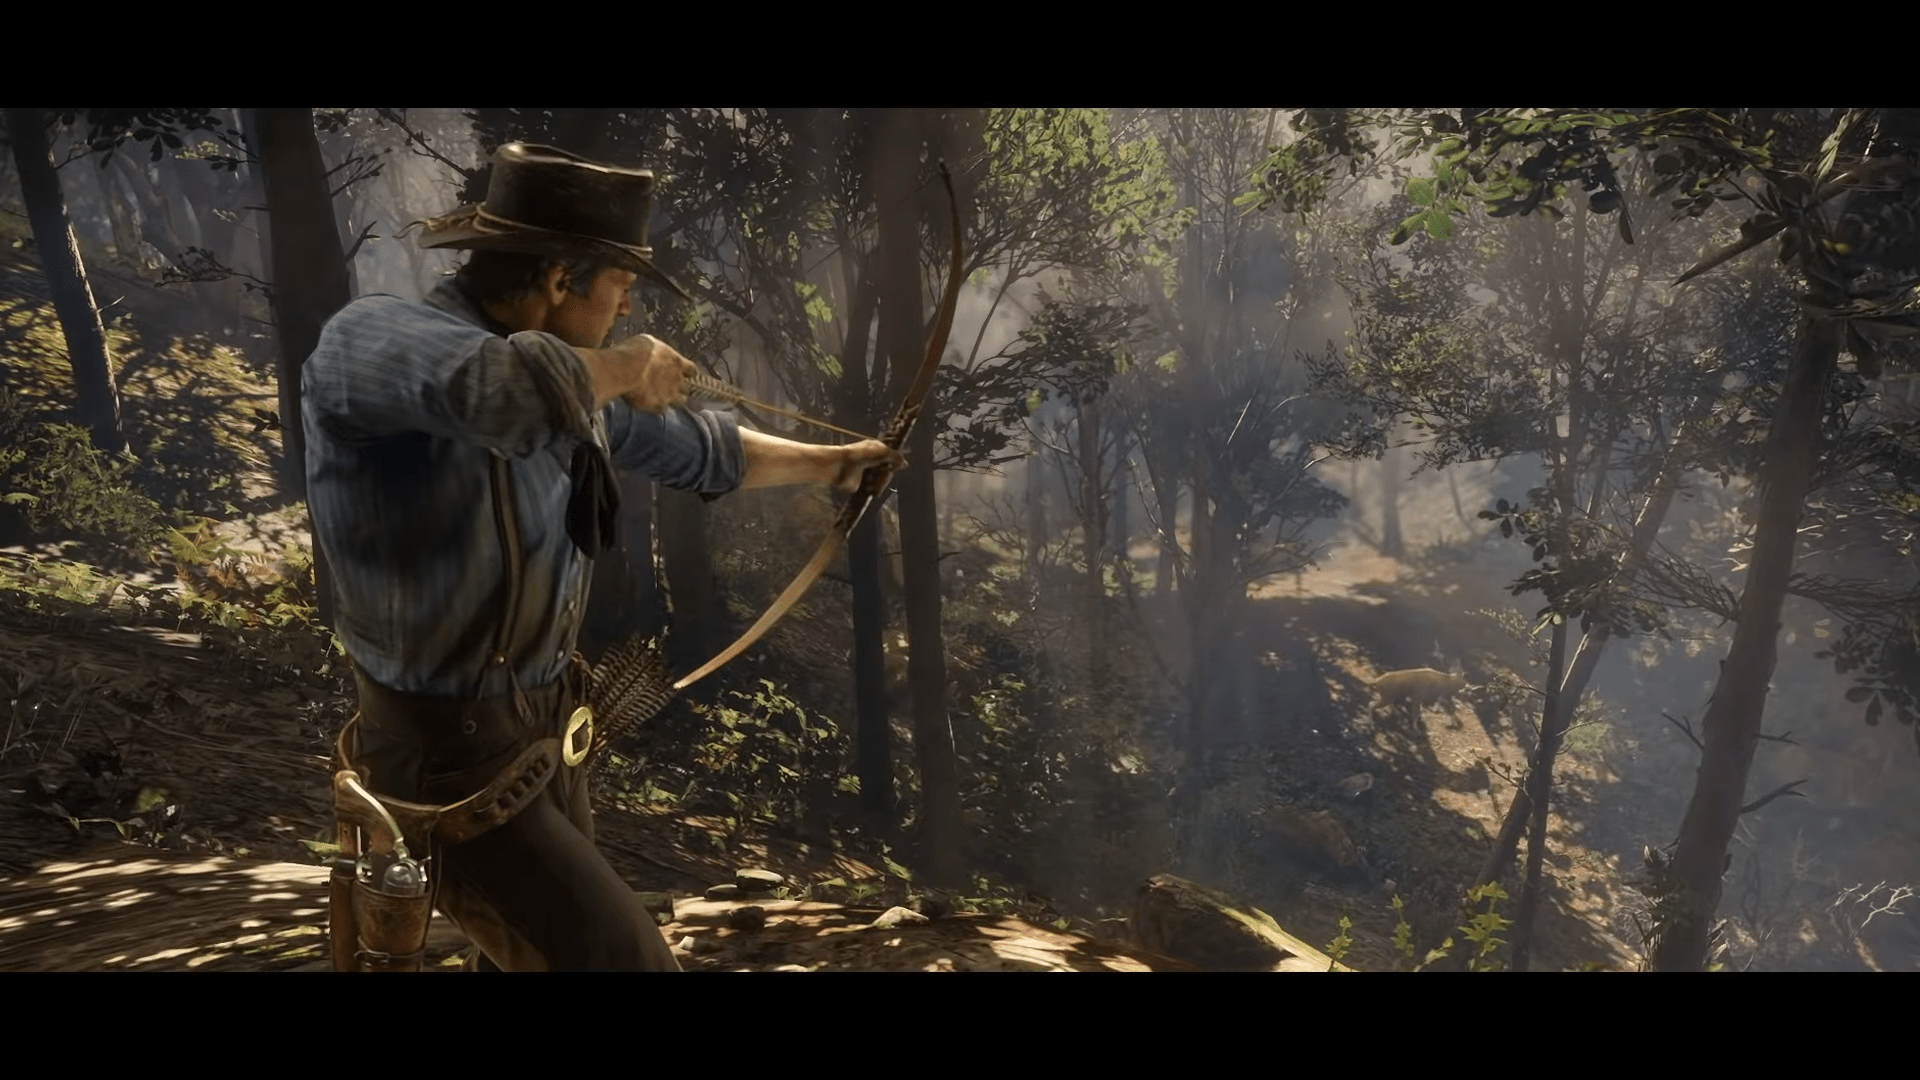 Red Dead Redemption 2 Now Available For Pre-Purchase and Preload On Rockstar Games Launcher